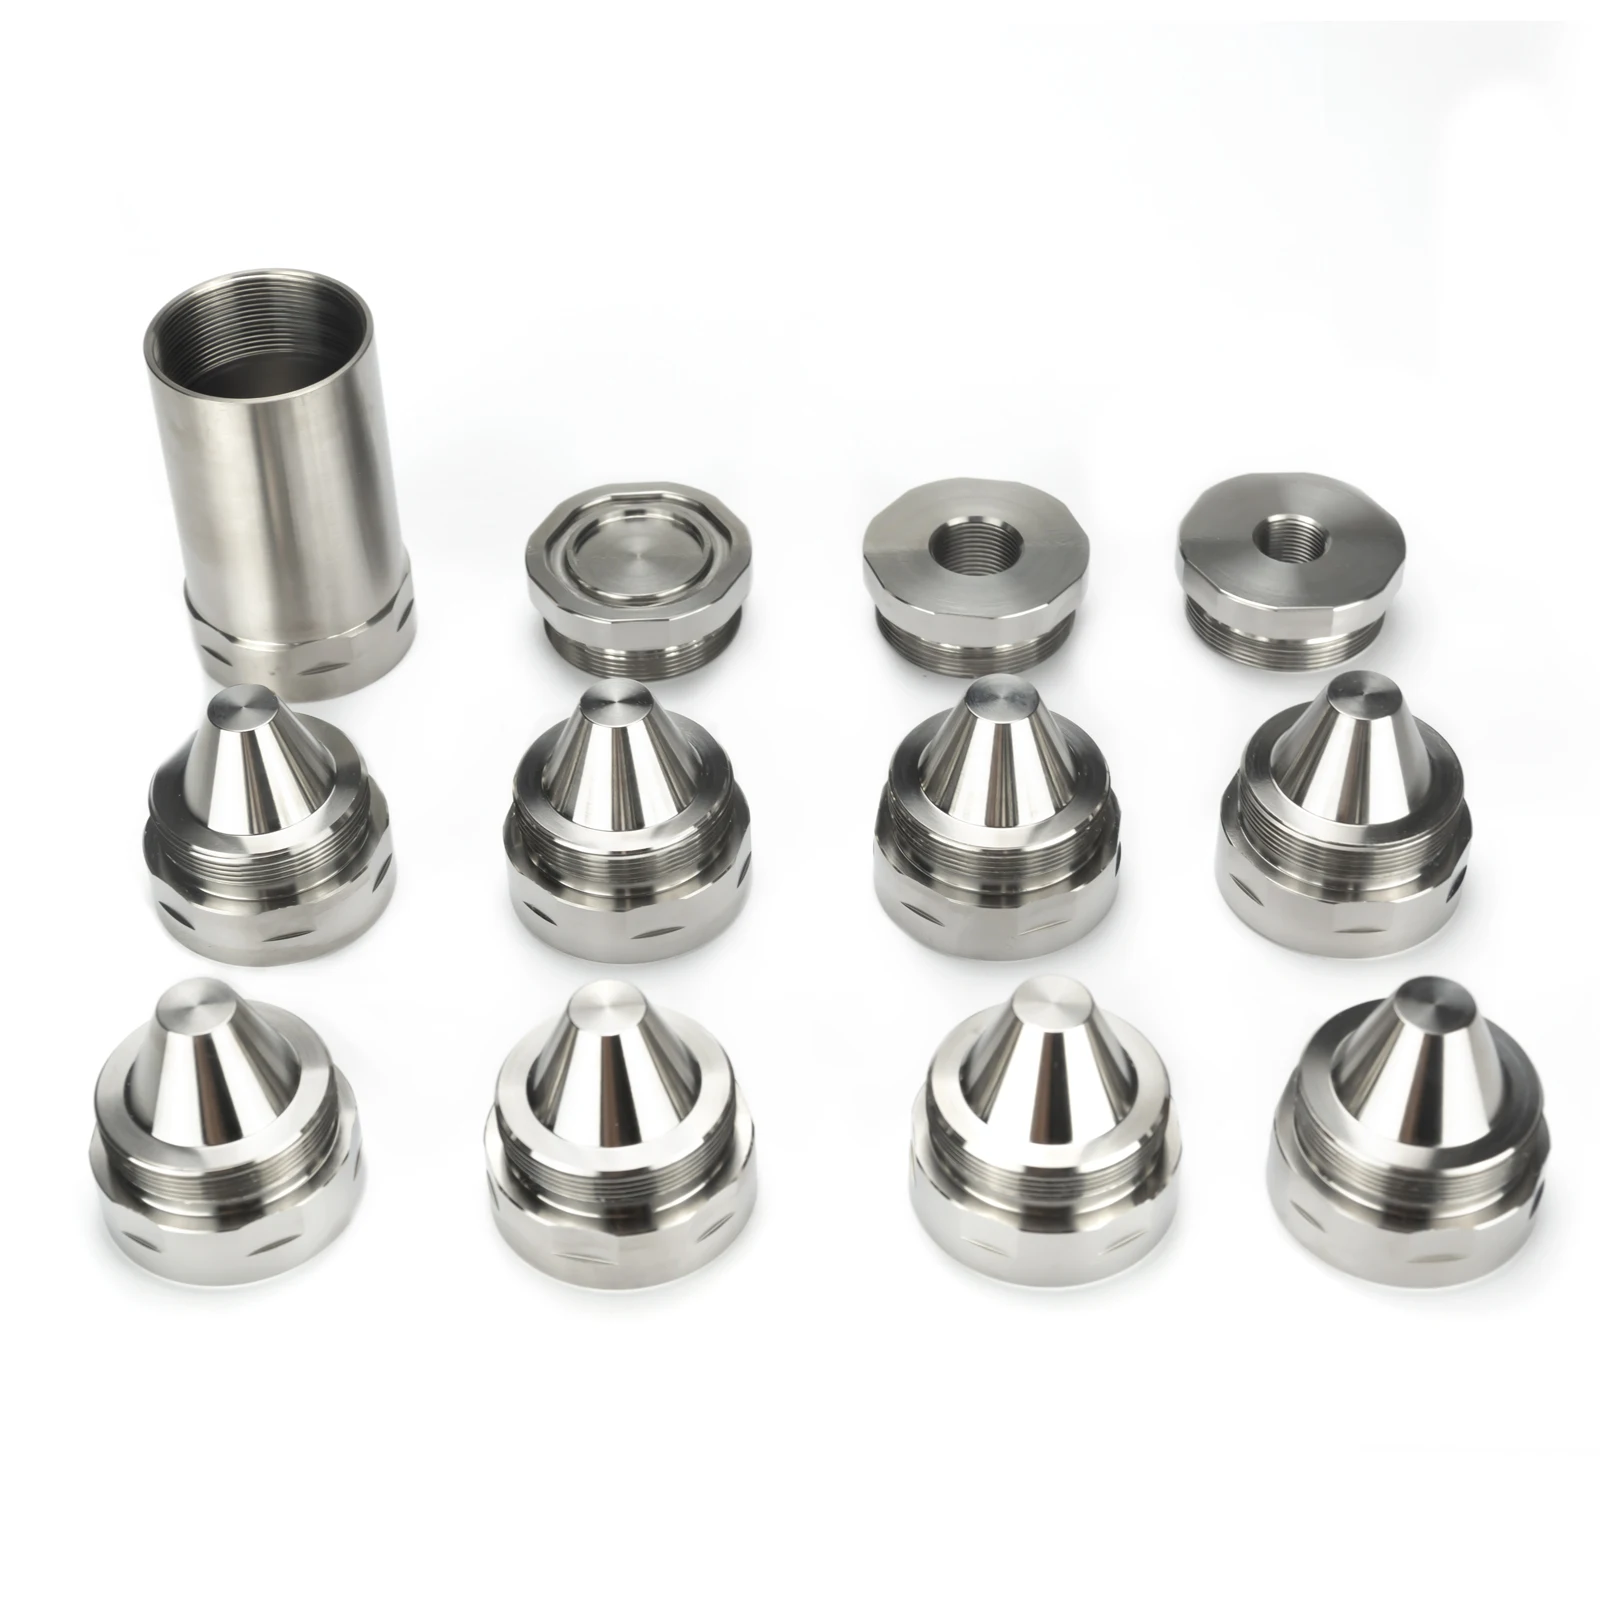 

7"L 1.5''OD Titanium GR5 Dodecagonal Modular Solvent Cleaning Tube 1.375x24 MST 8x Screw Cone Cups with 1/2x28+5/8x24 End Caps